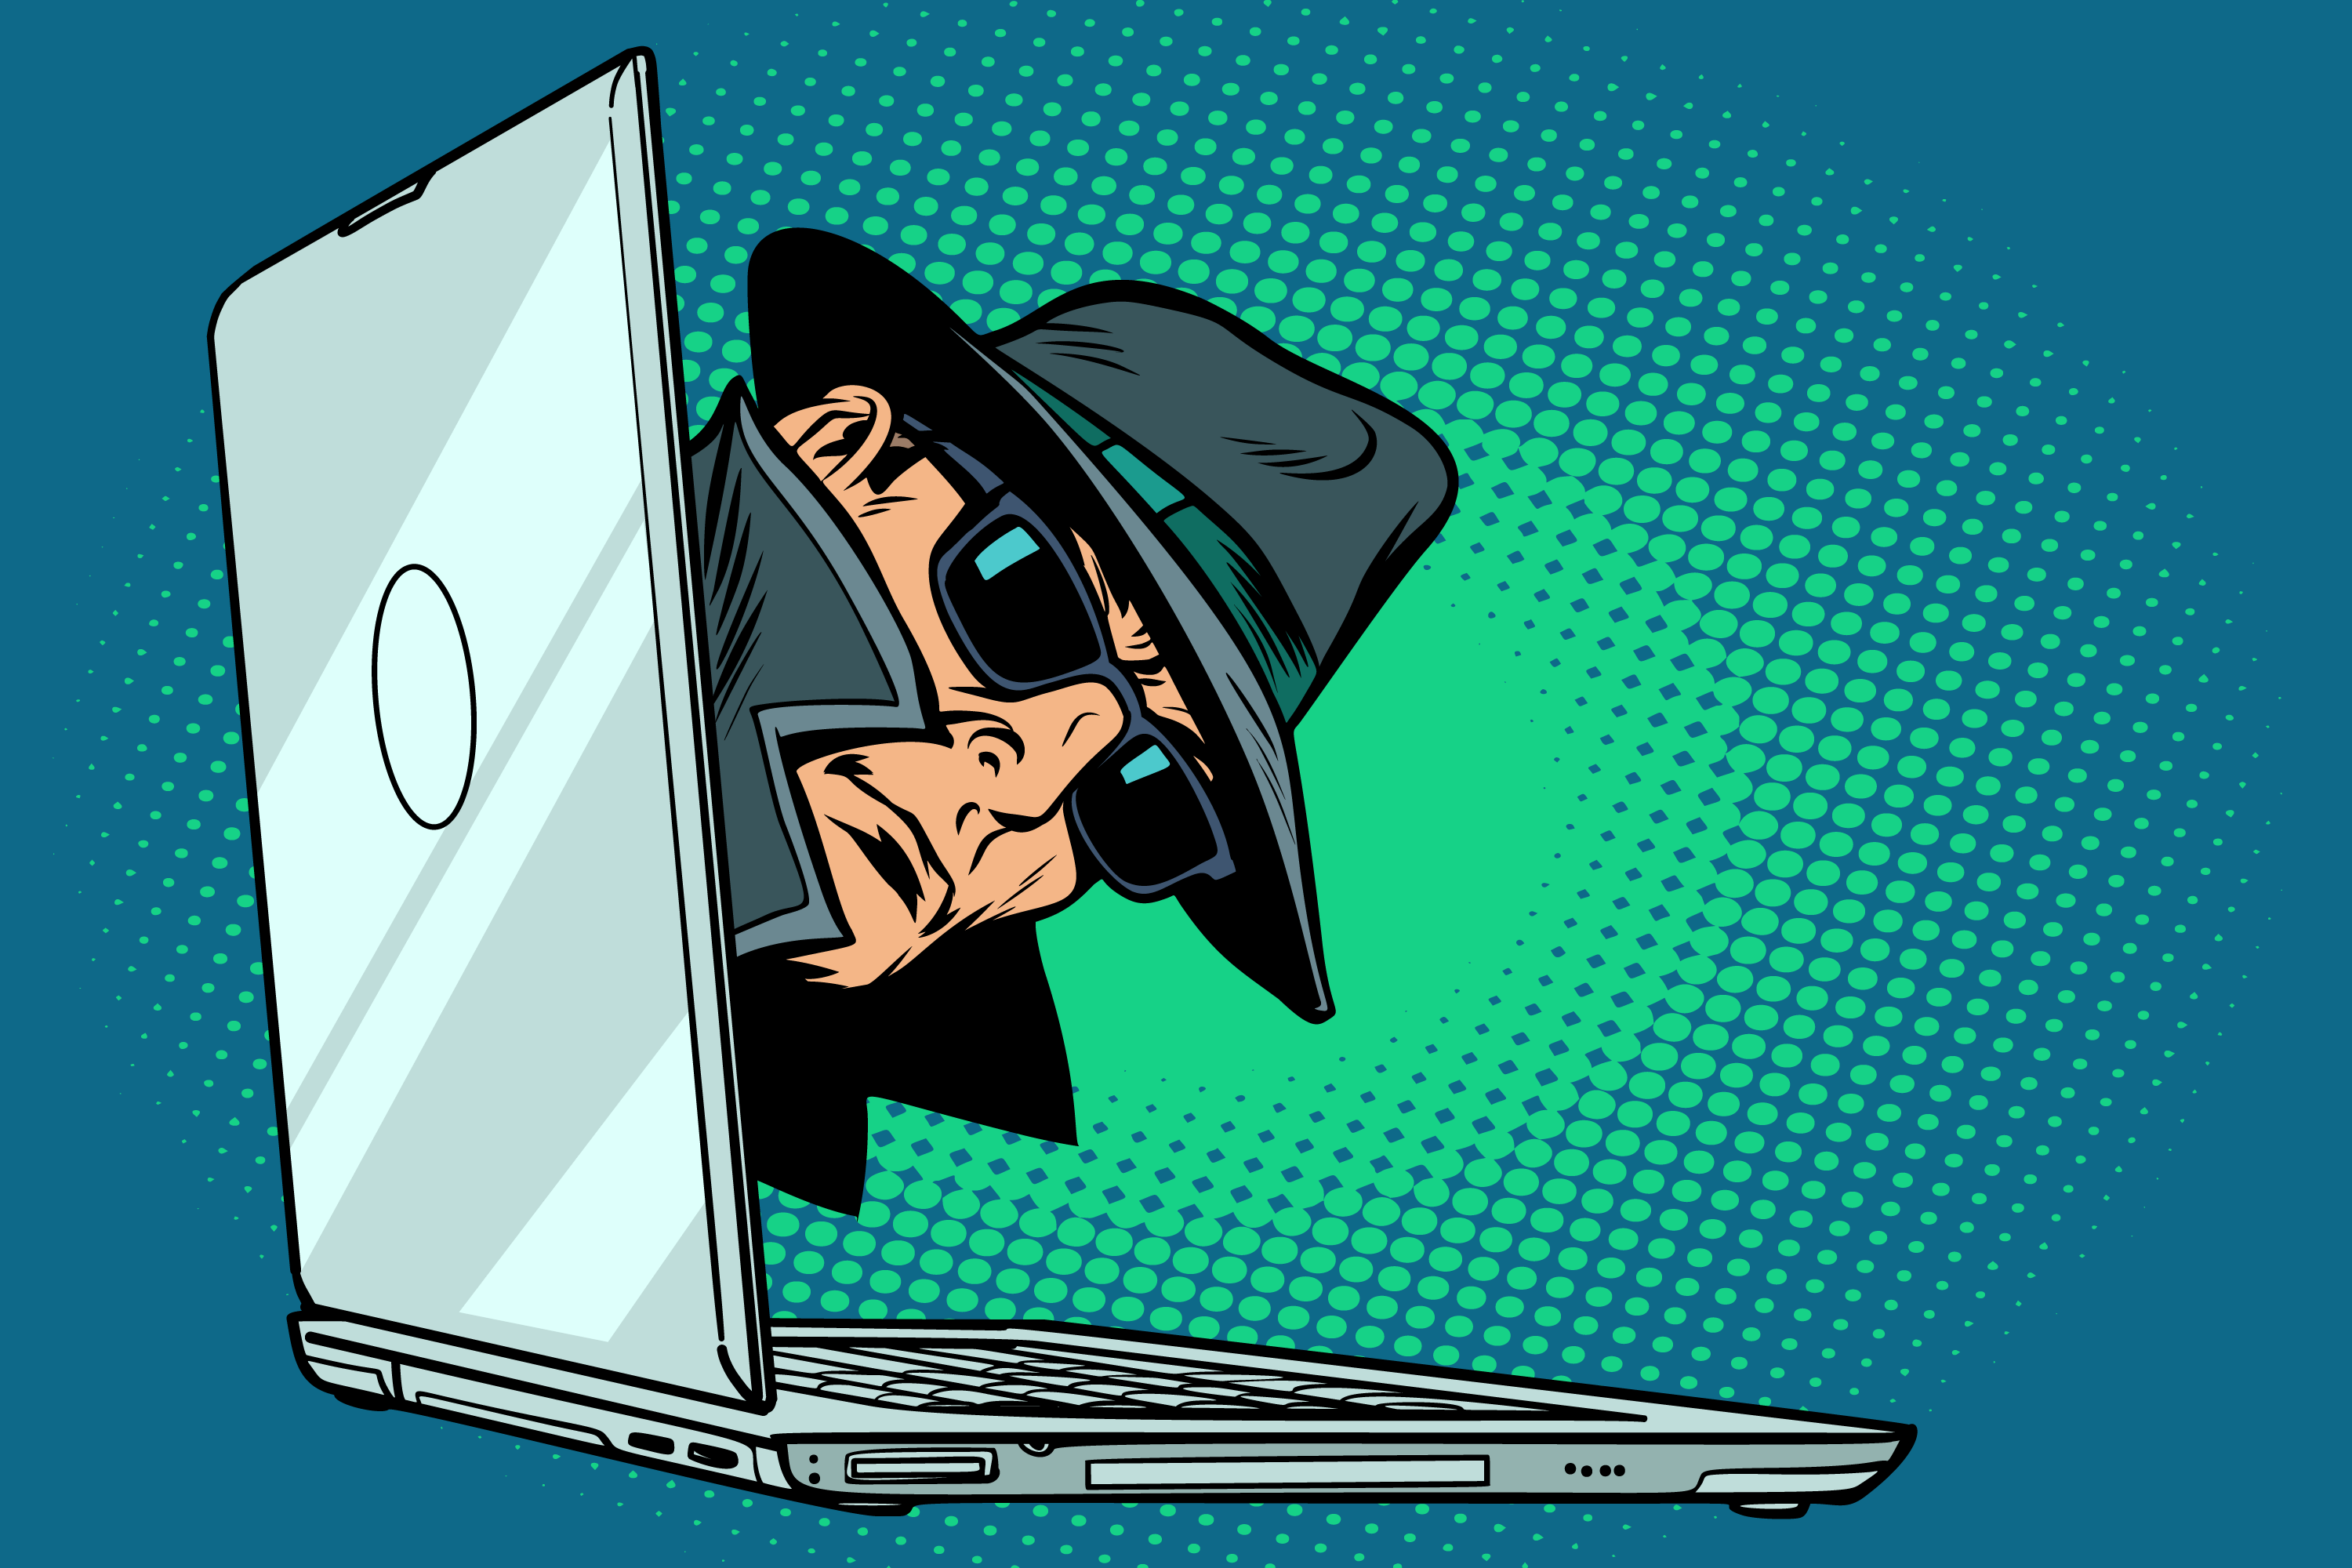 A hacker stole 17 domain names during the Ethereum Name Service Auction, and now they’re giving them back – here’s why